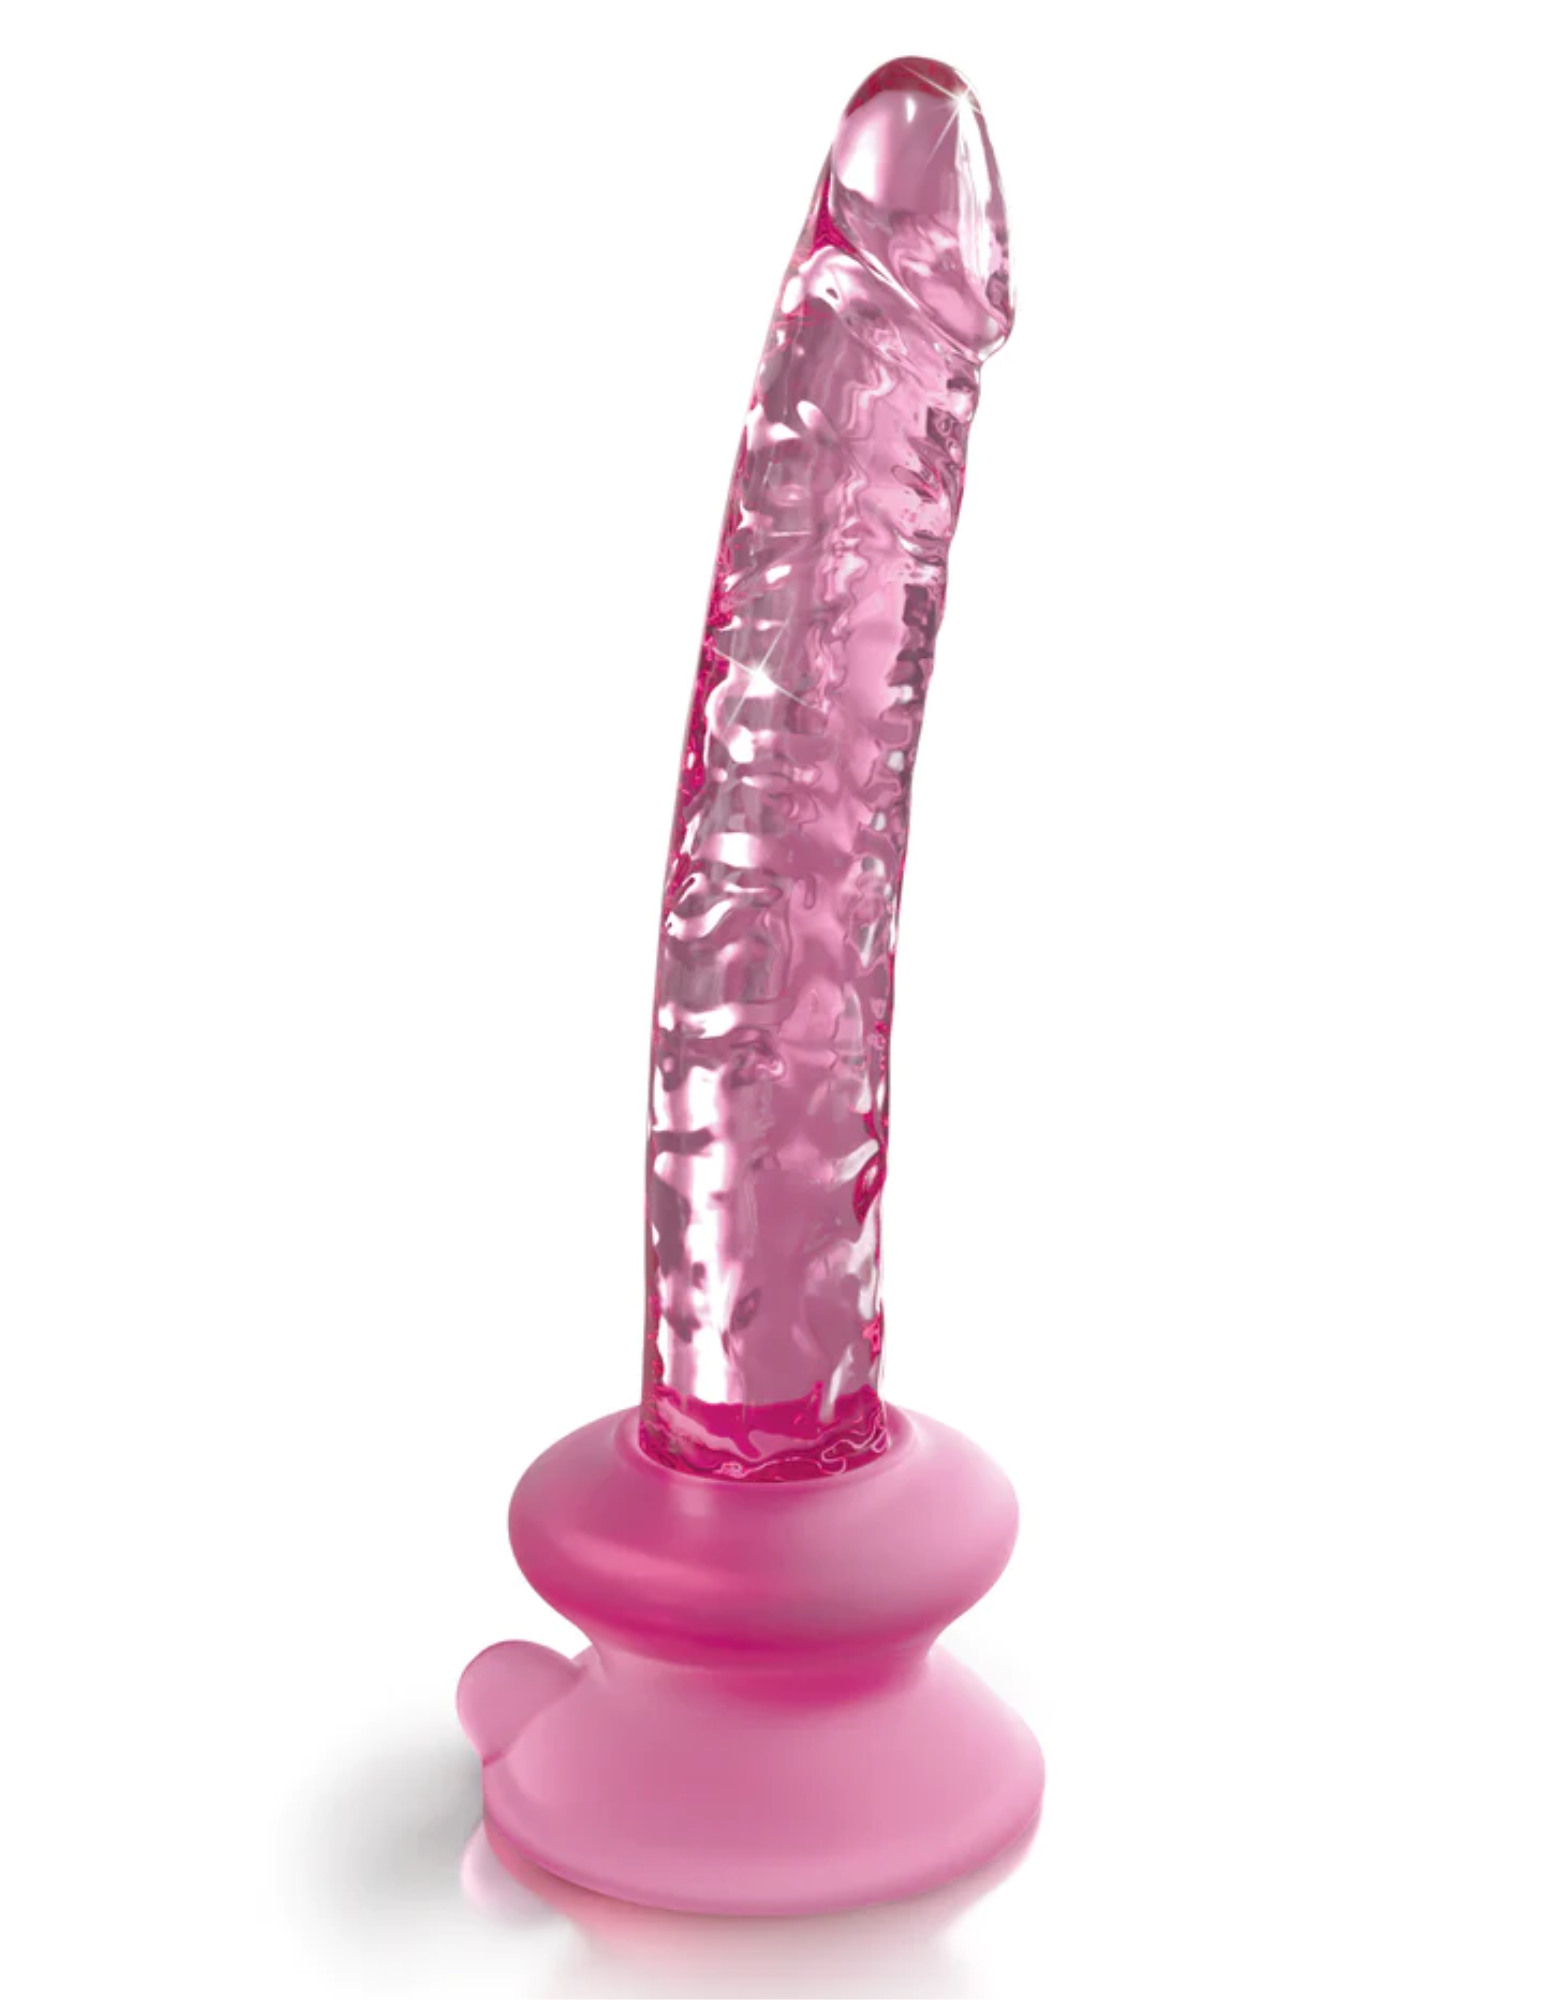 Full view of the Icicles No. 86 Glass Wand w/ Suction Cup from Pipedreams (pink) shows its textured design as well as its silicone suction base.